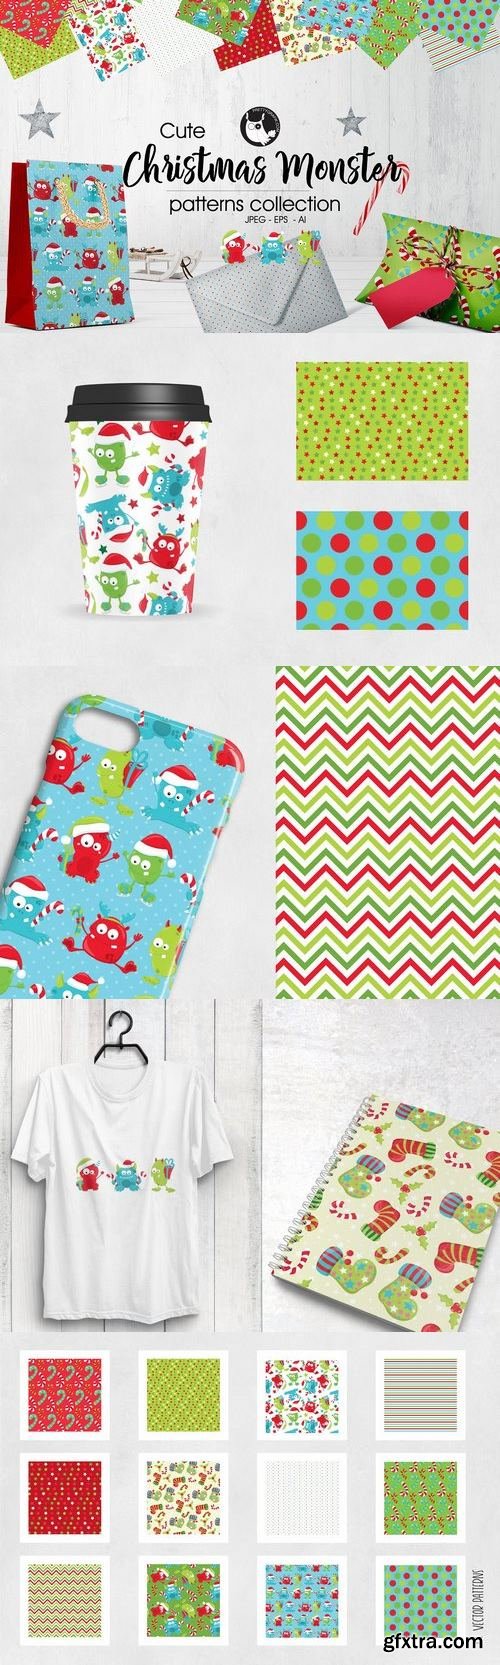 CM - CHRISTMAS MONSTER Pattern collection 2018392